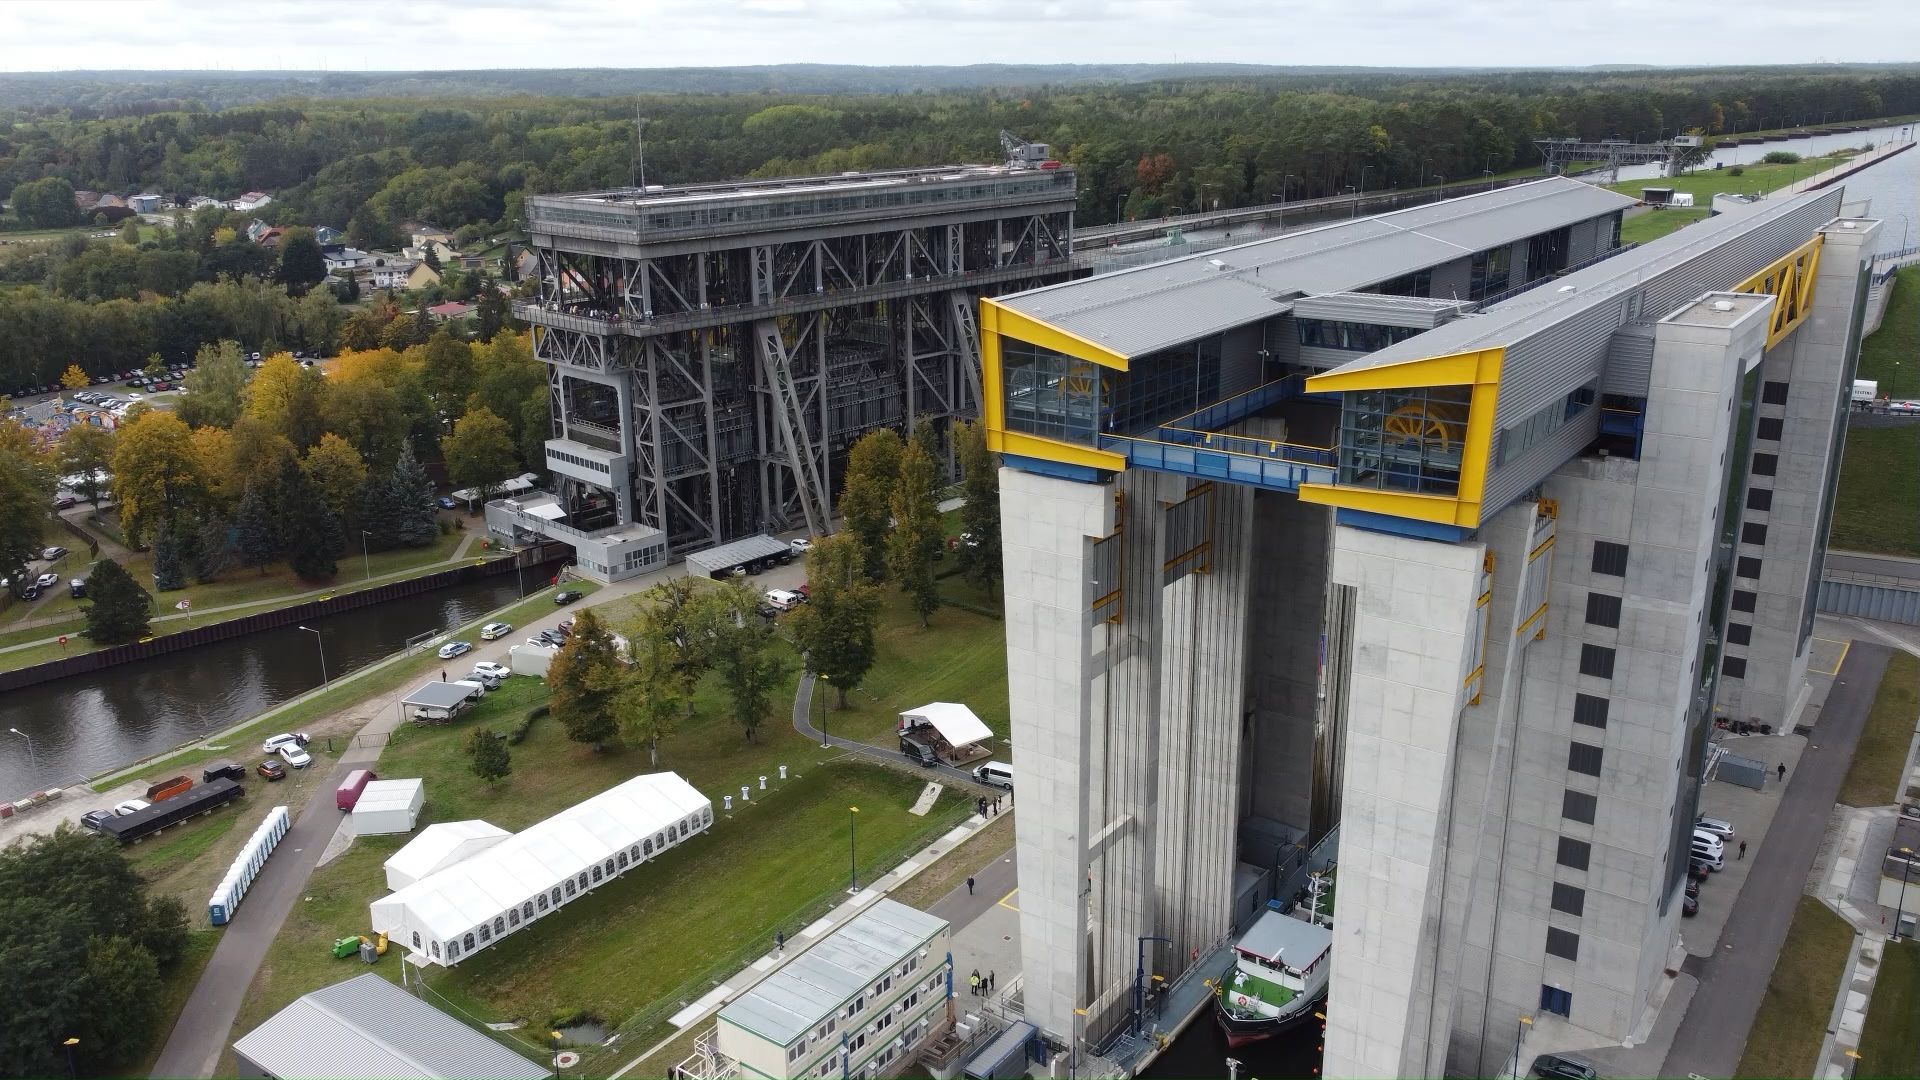 New Niederfinow ship lift inaugurated after 14 years of construction - Federal Minister of Transport Wissing gives opening speech